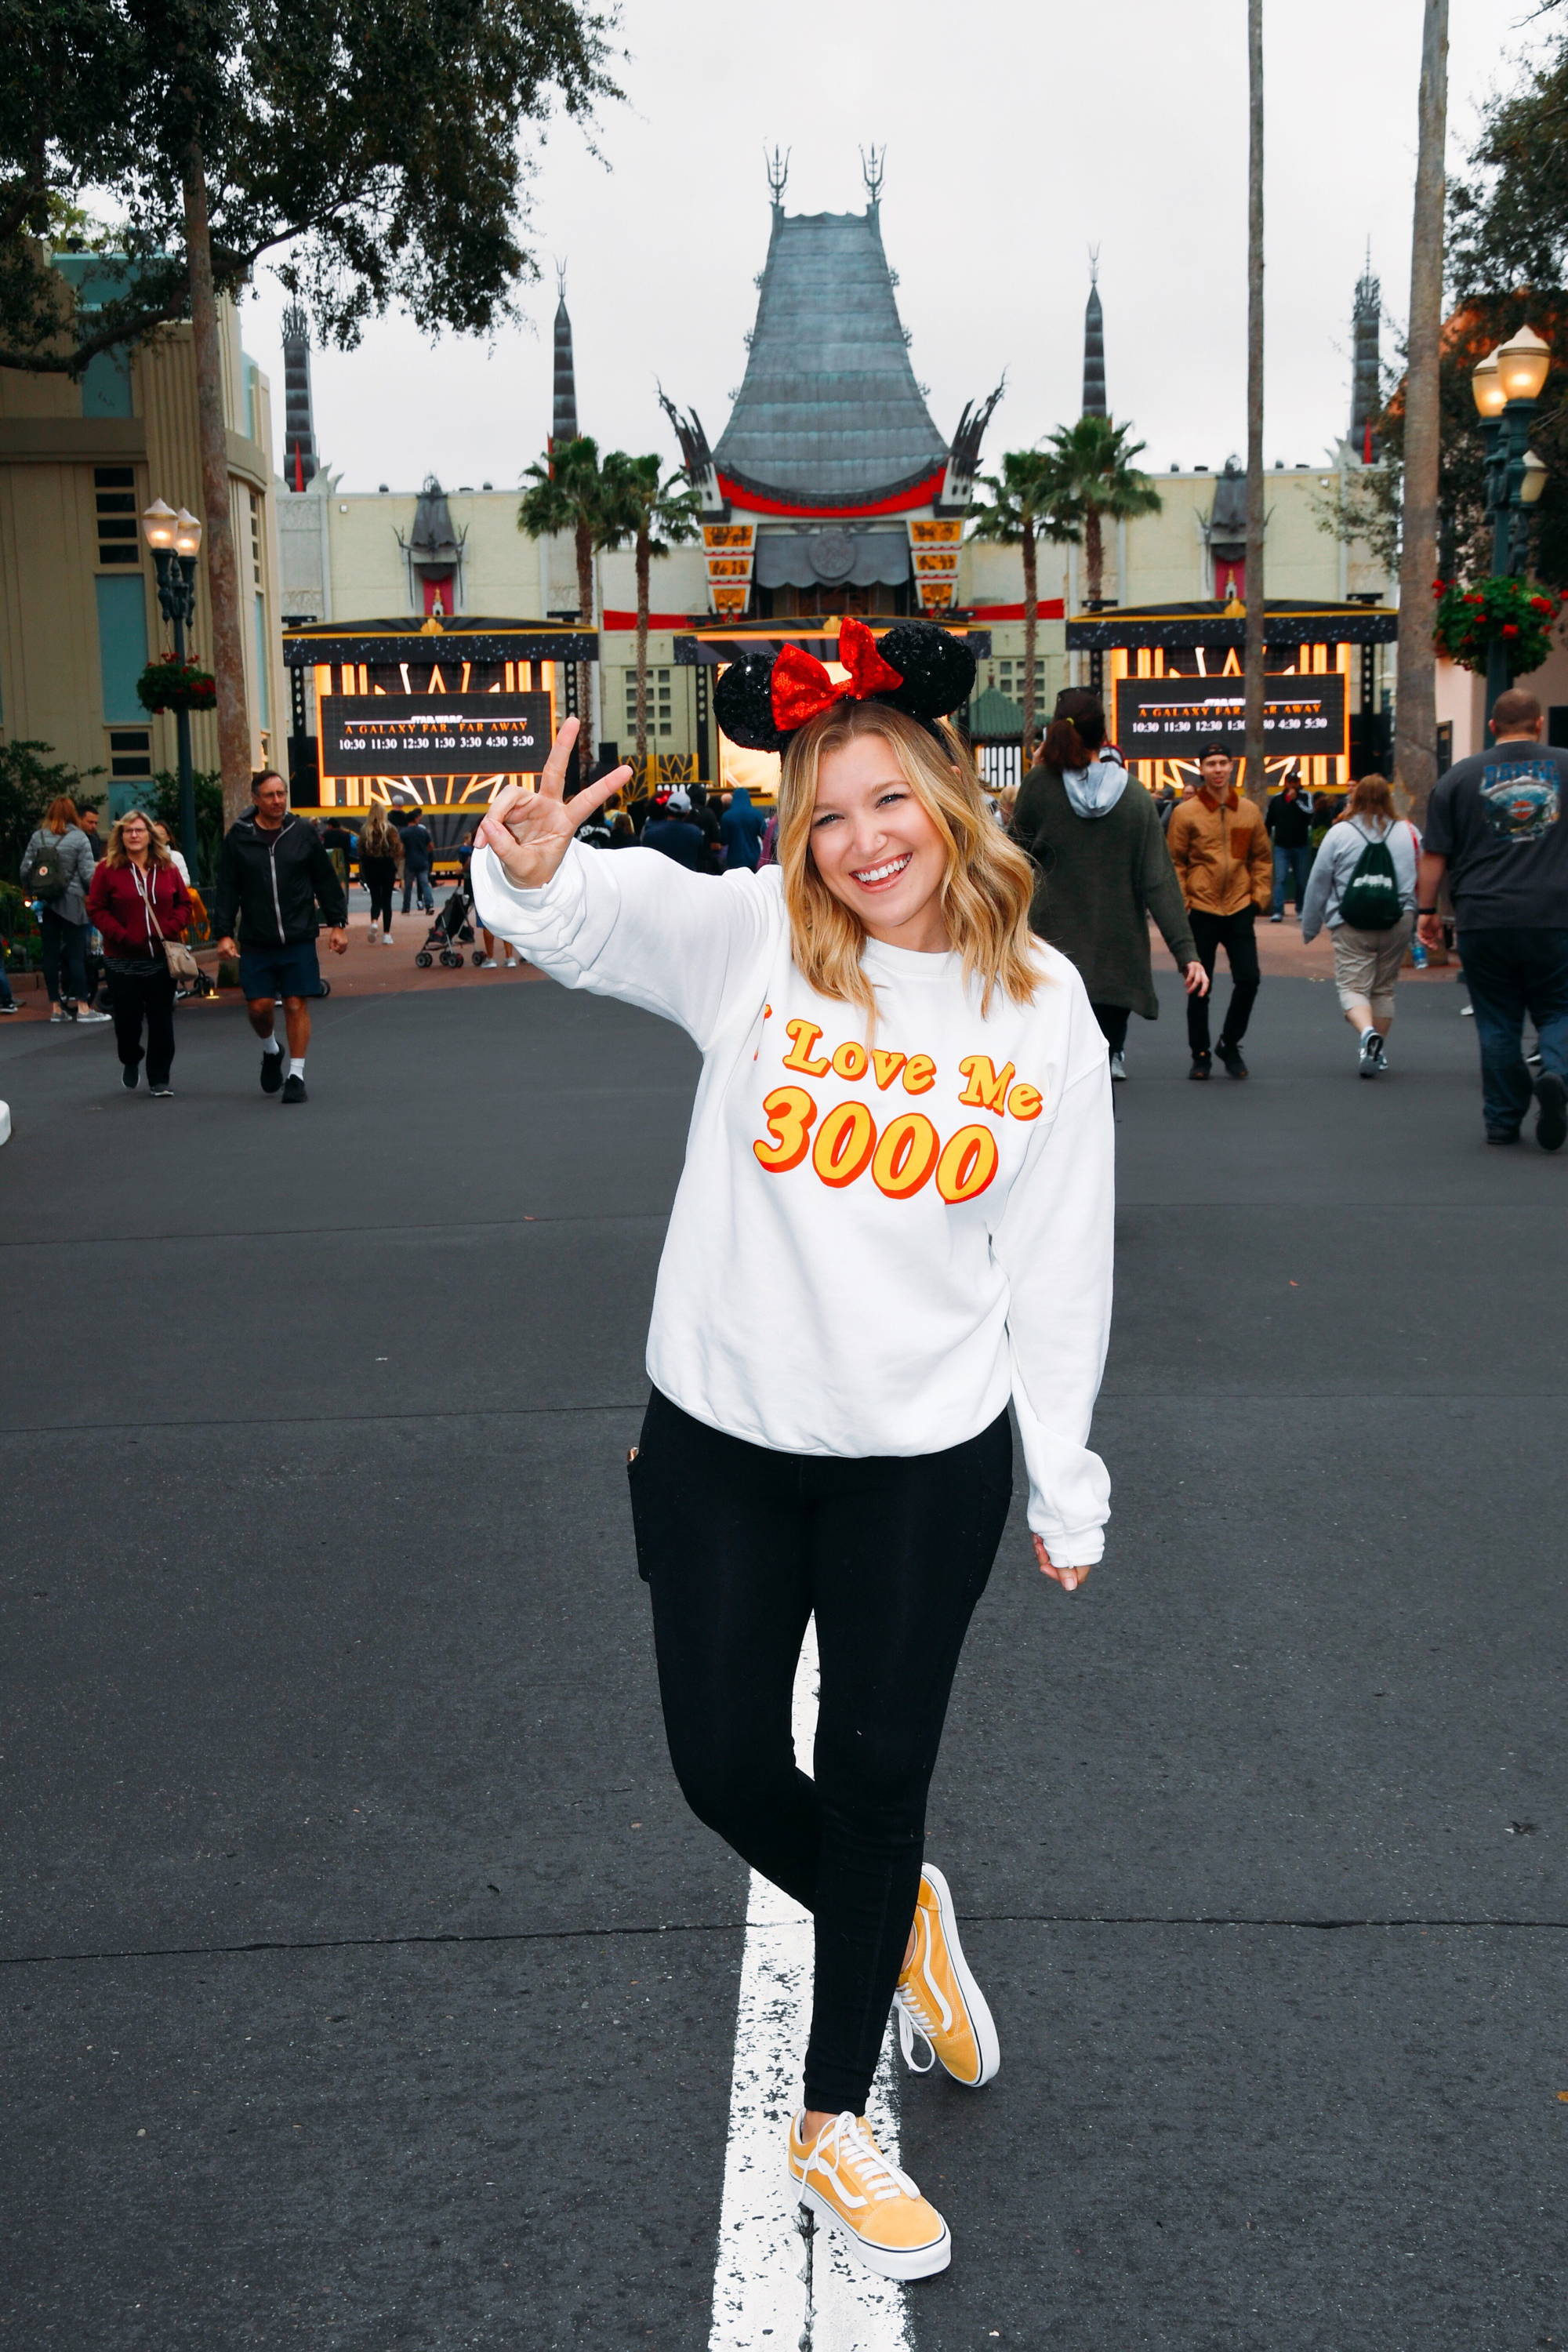 I Love Me 3000: The Best Solo Things to Do at Disney World This Valentines Day